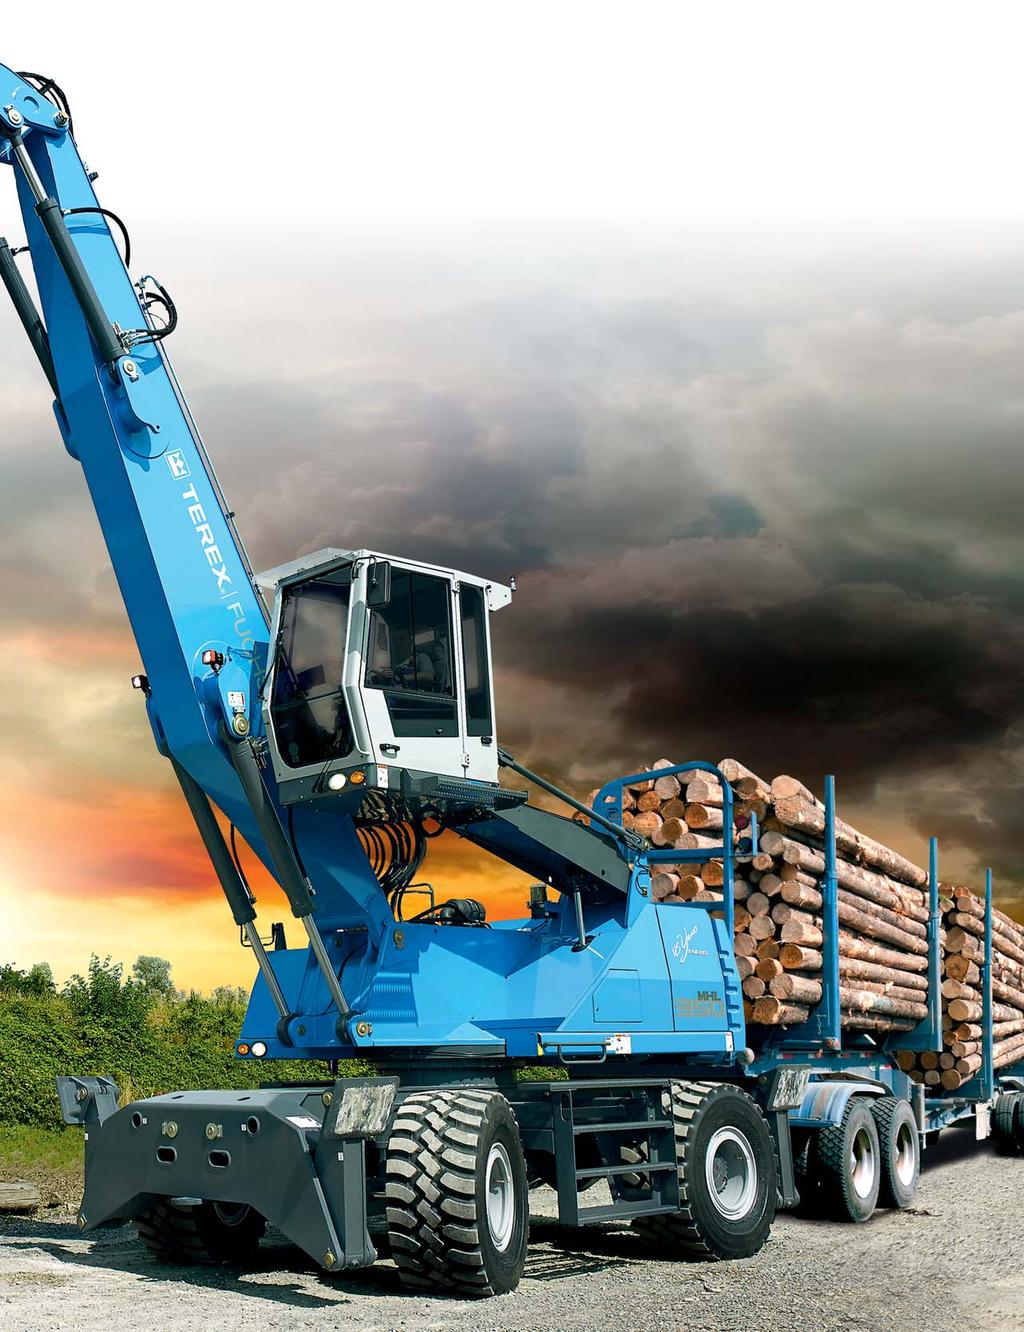 TEREX FUCHS LOADING MACHINES CONVINCE THROUGH POWER AND QUALITY. The benchmark for effective timber handling. More power. Larger working radius. Greater volume per day.